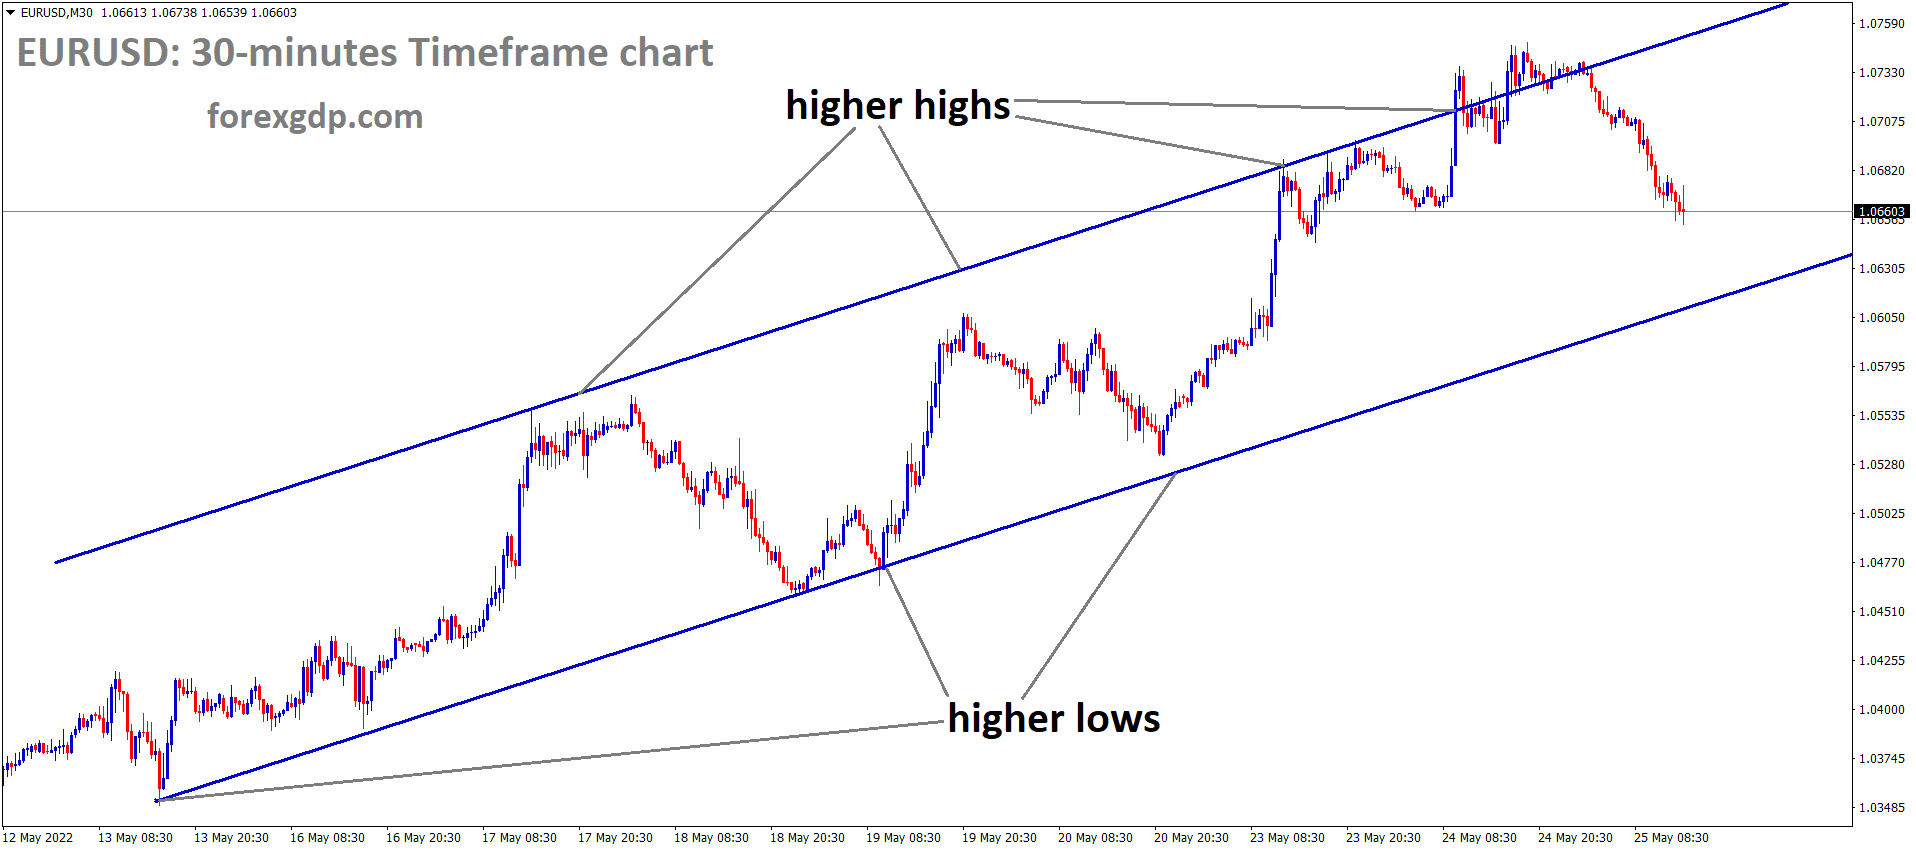 EURUSD M30 Time Frame analysis Market is moving in an Ascending channel and the market has Fallen from the higher high area of the channel